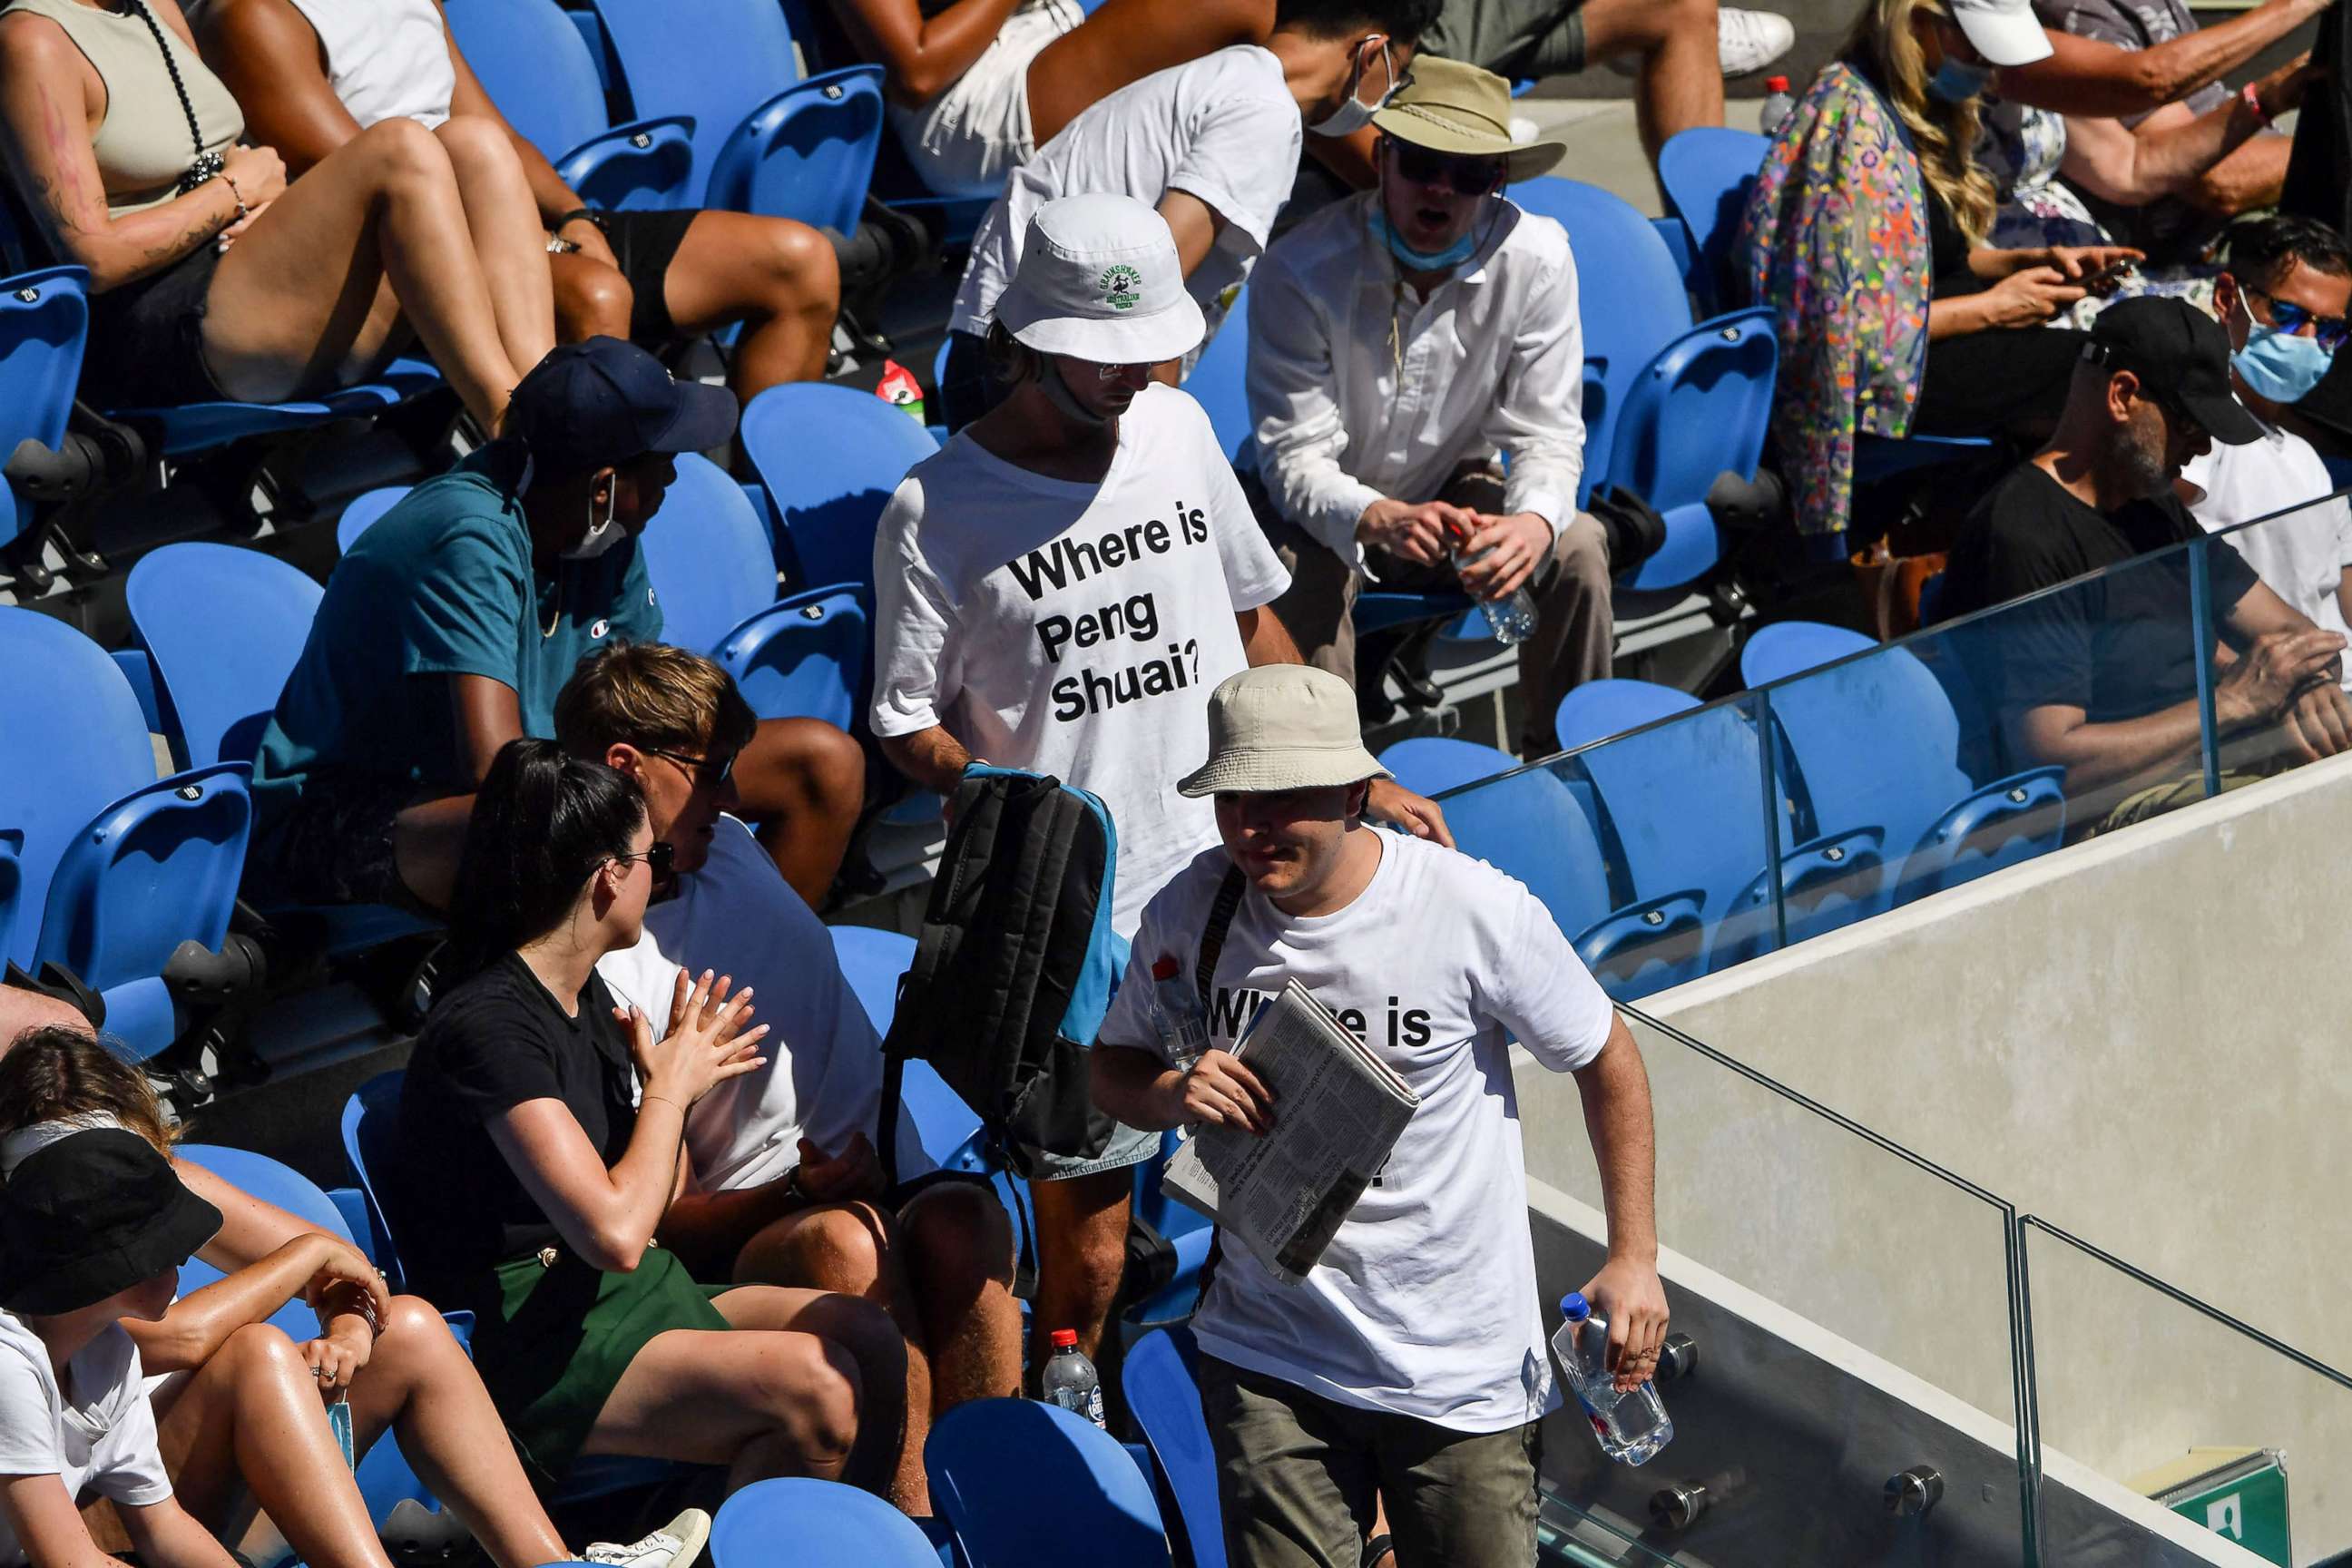 PHOTO: Two spectators wearing "Where is Peng Shuai?" t-shirts, referring to the former doubles world number one from China, make their way to seats in the stands on day nine of the Australian Open tennis tournament in Melbourne, Jan. 25, 2022.